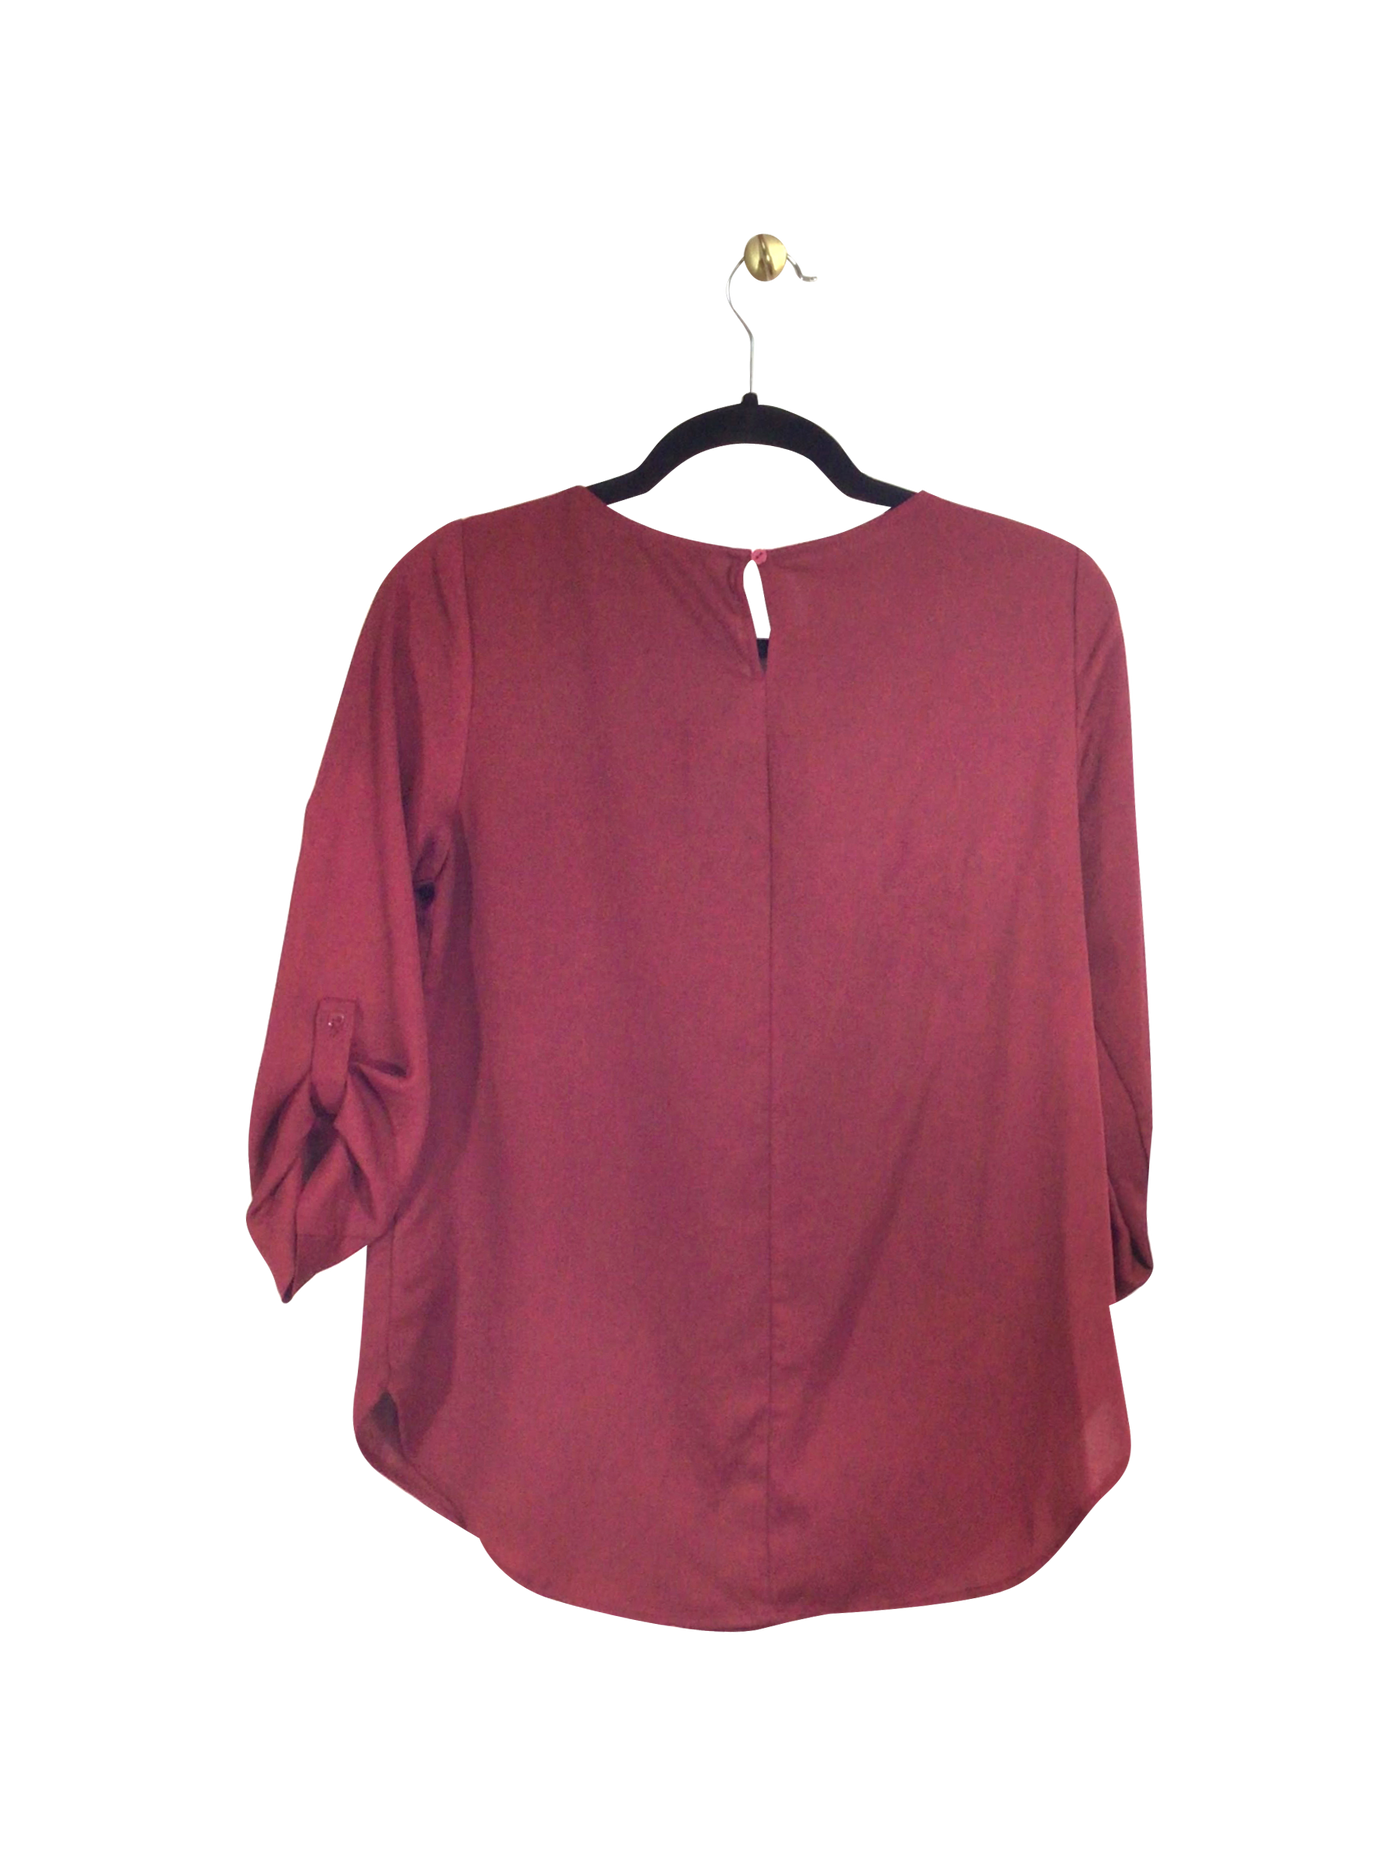 BECOOL Blouse Regular fit in Red - Size S | 7.14 $ KOOP